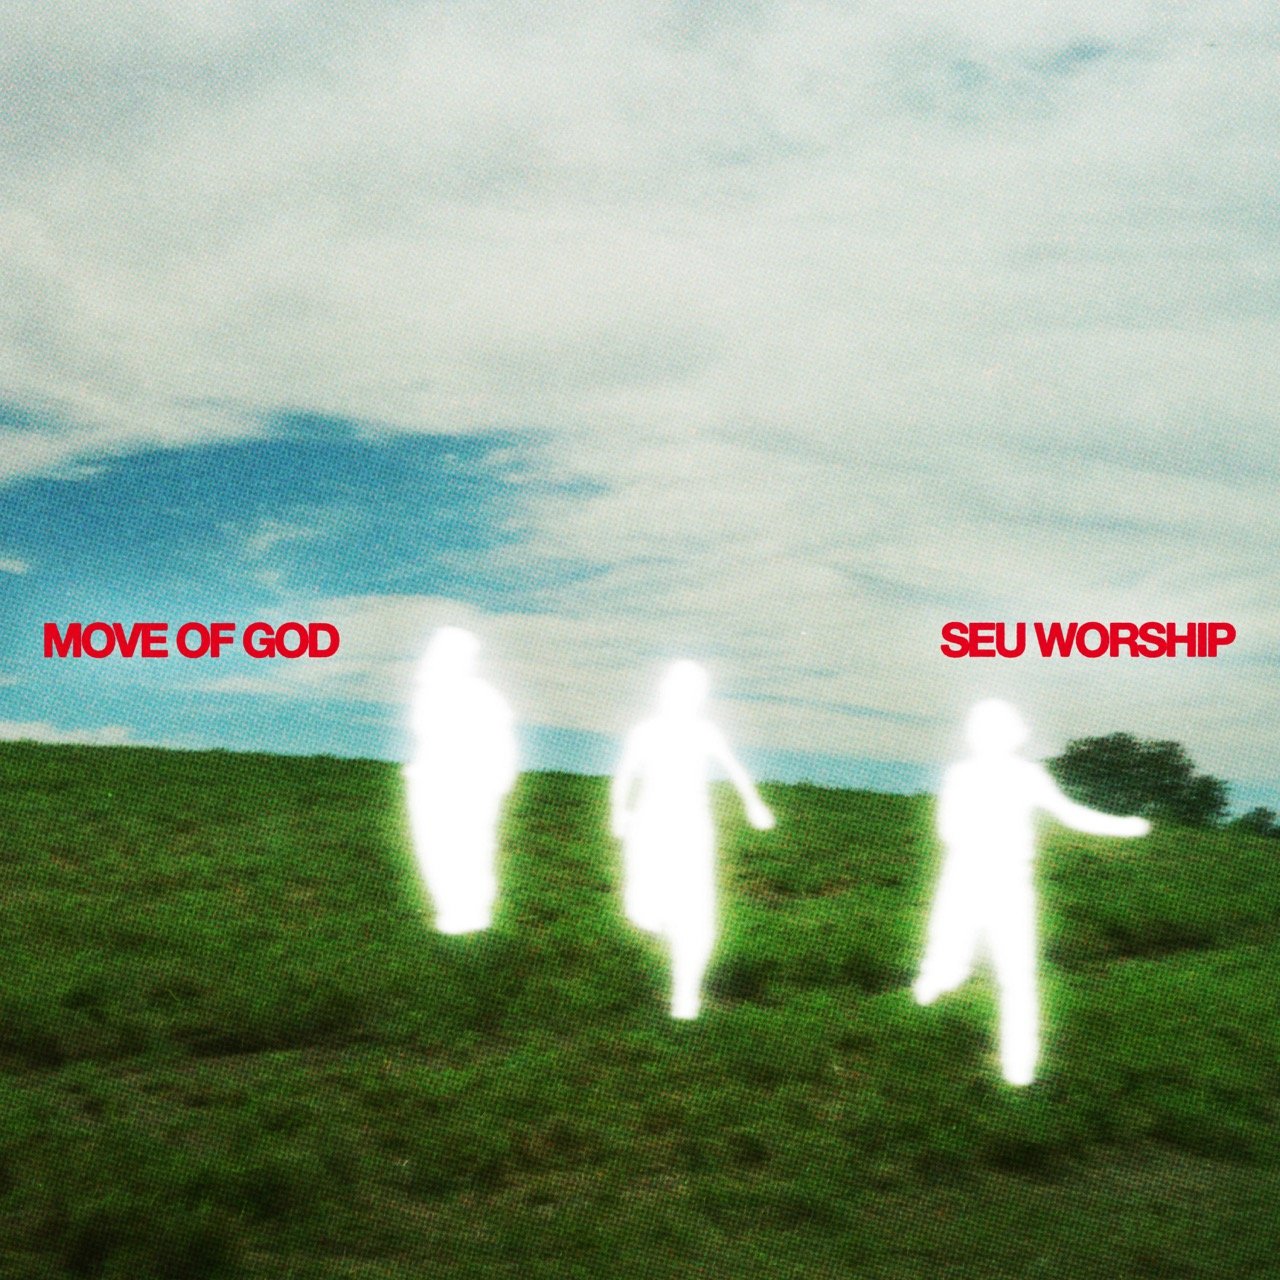 SEU Worship's song "Move of God" cover art; three people running through a field